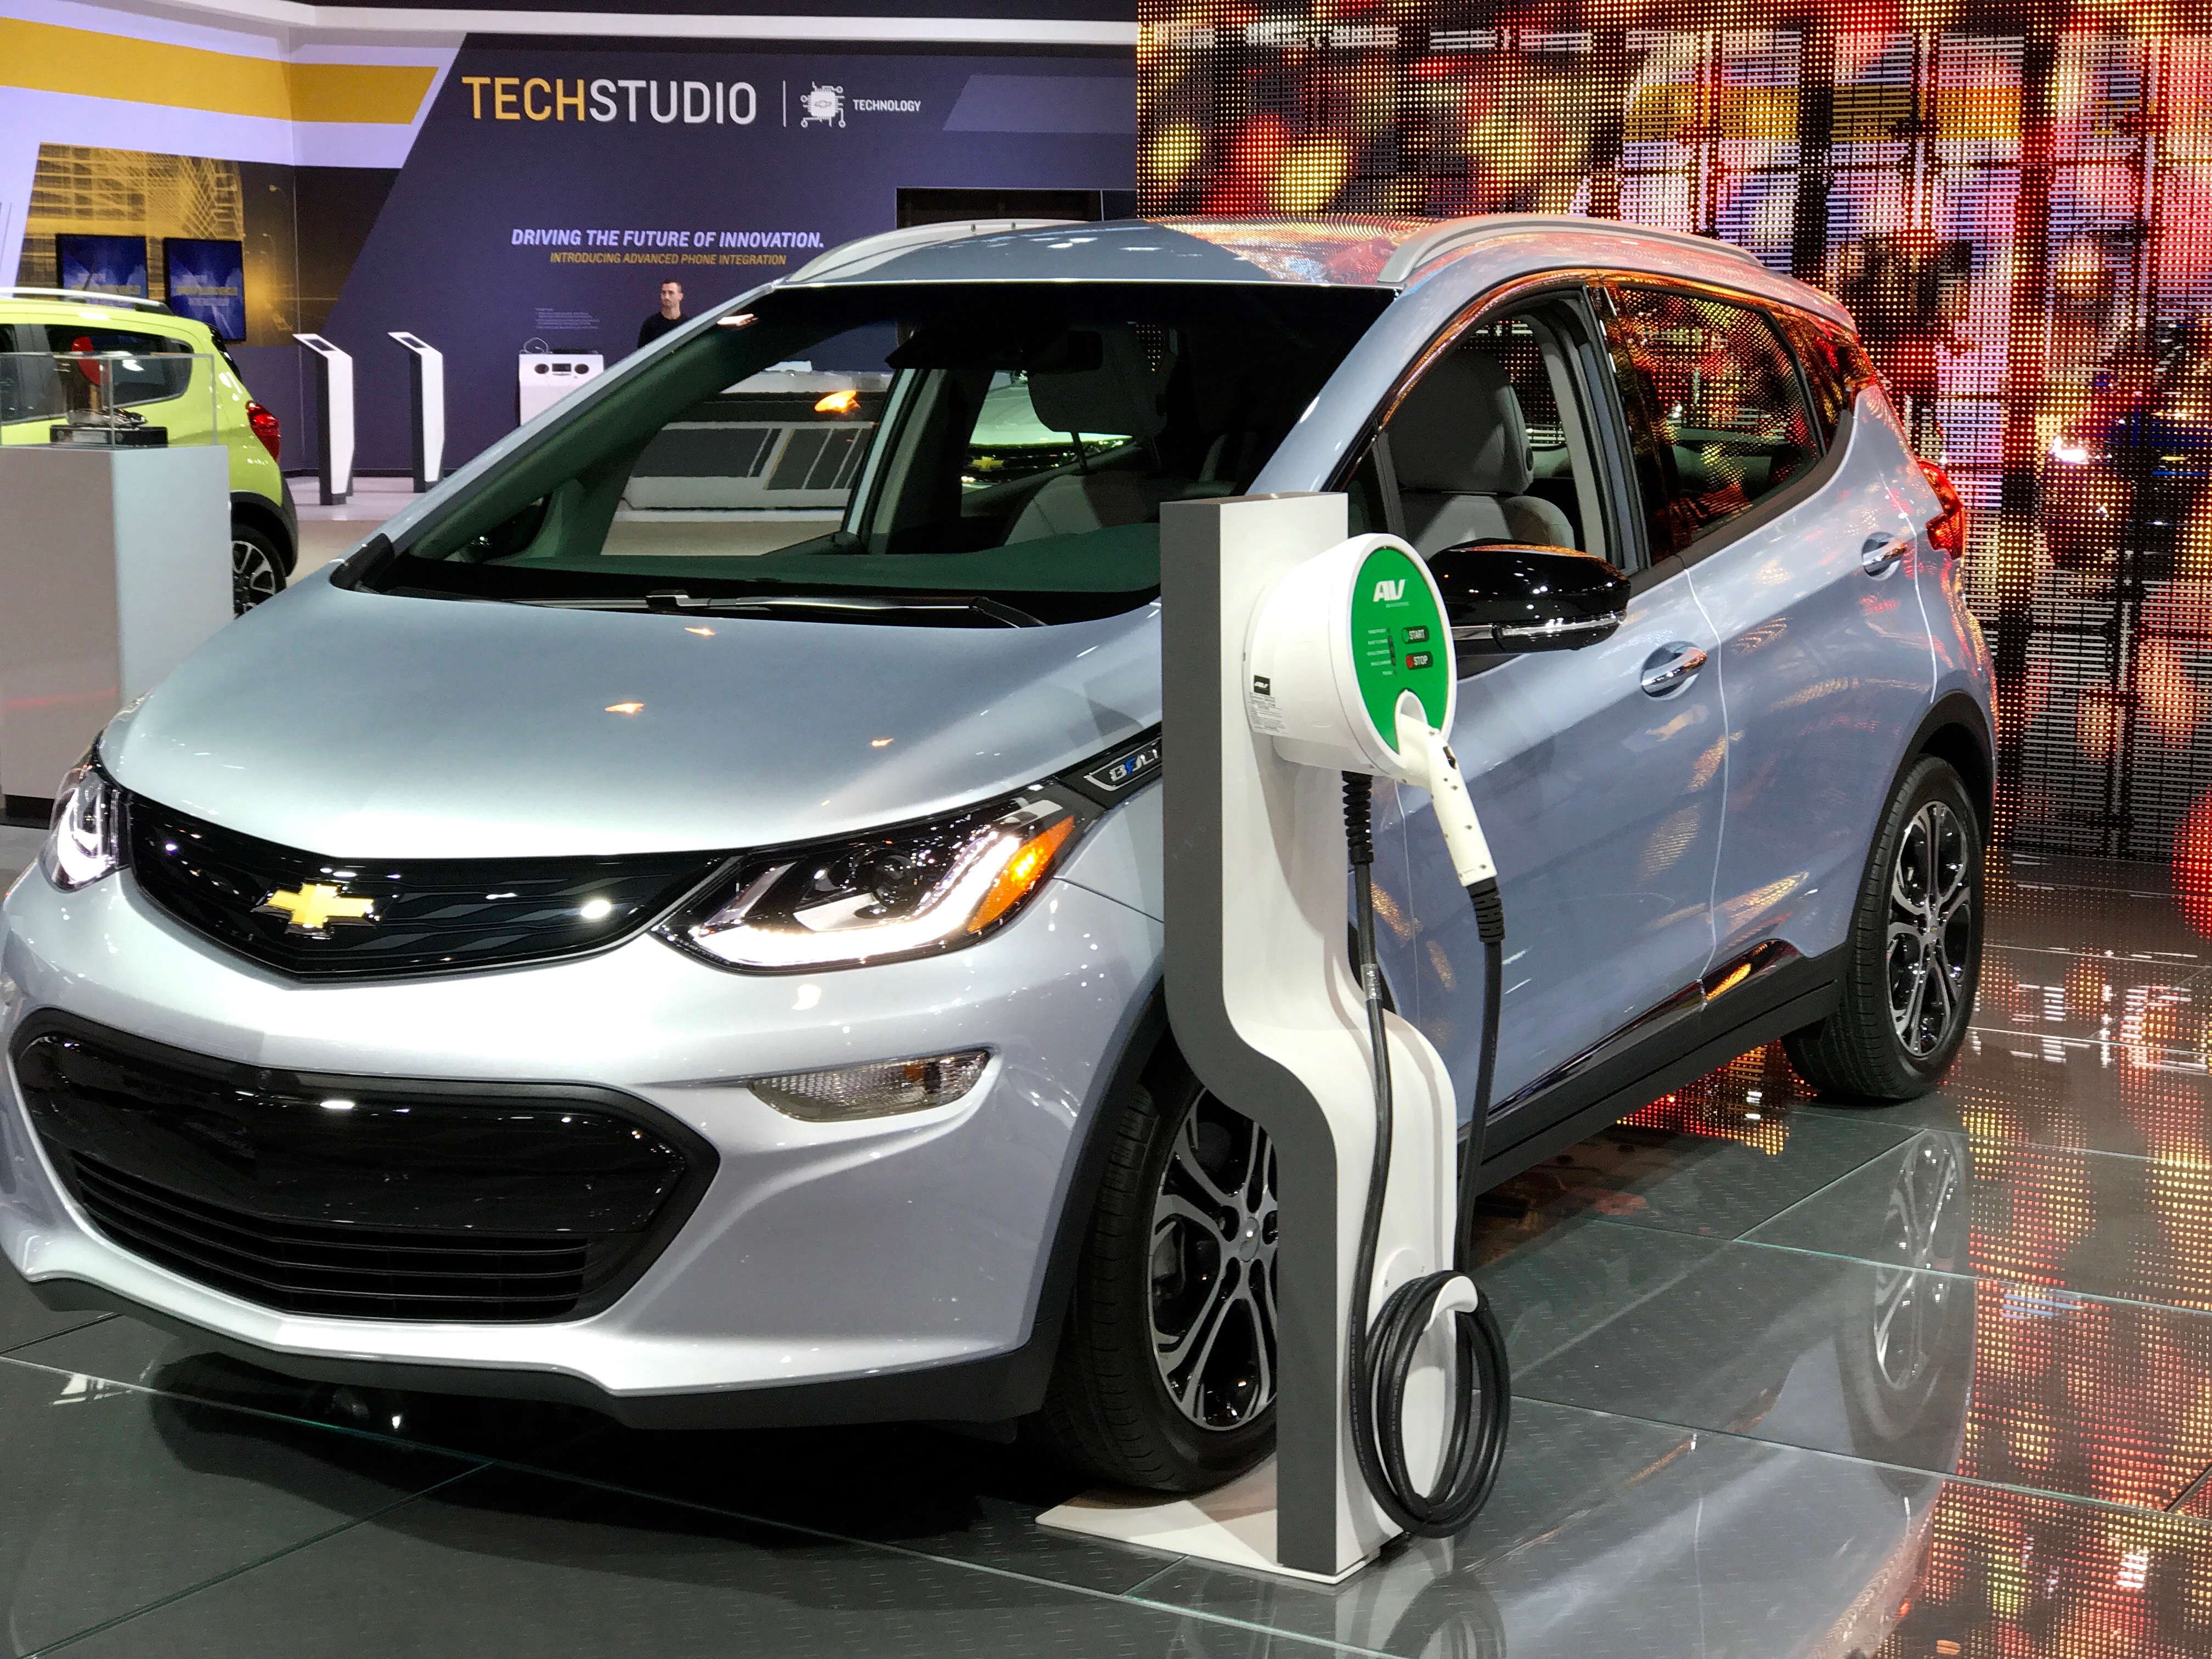 new-york-to-offer-2-000-rebate-for-electric-vehicle-purchases-the